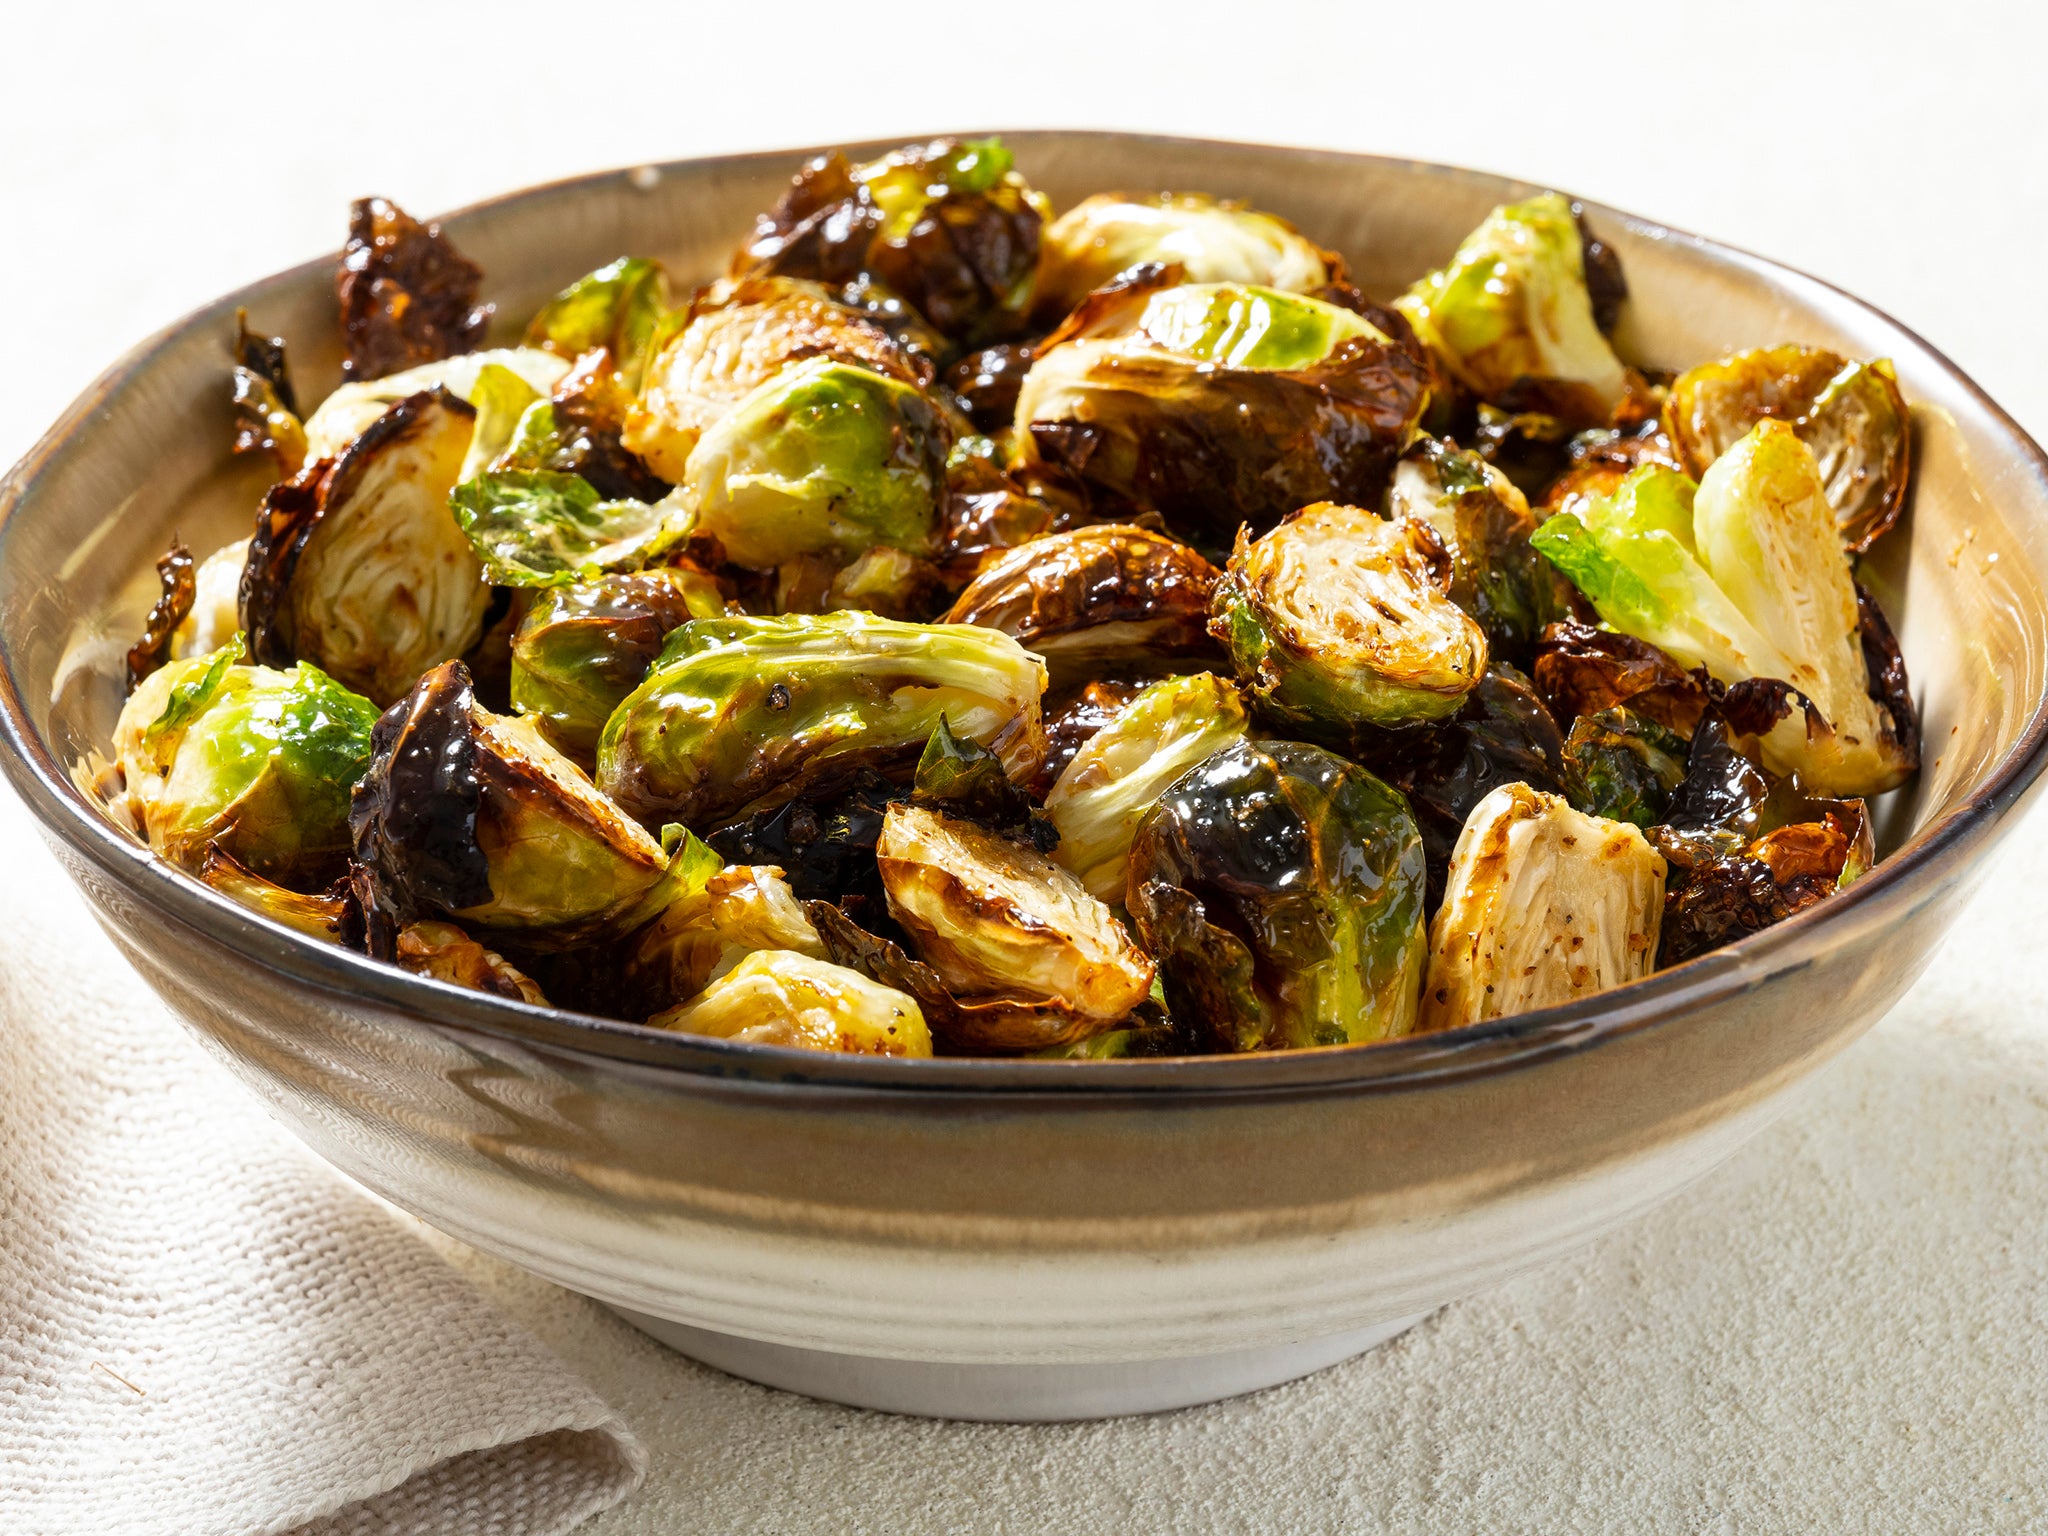 Sprouts get beautifully brown and crisp in the air fryer